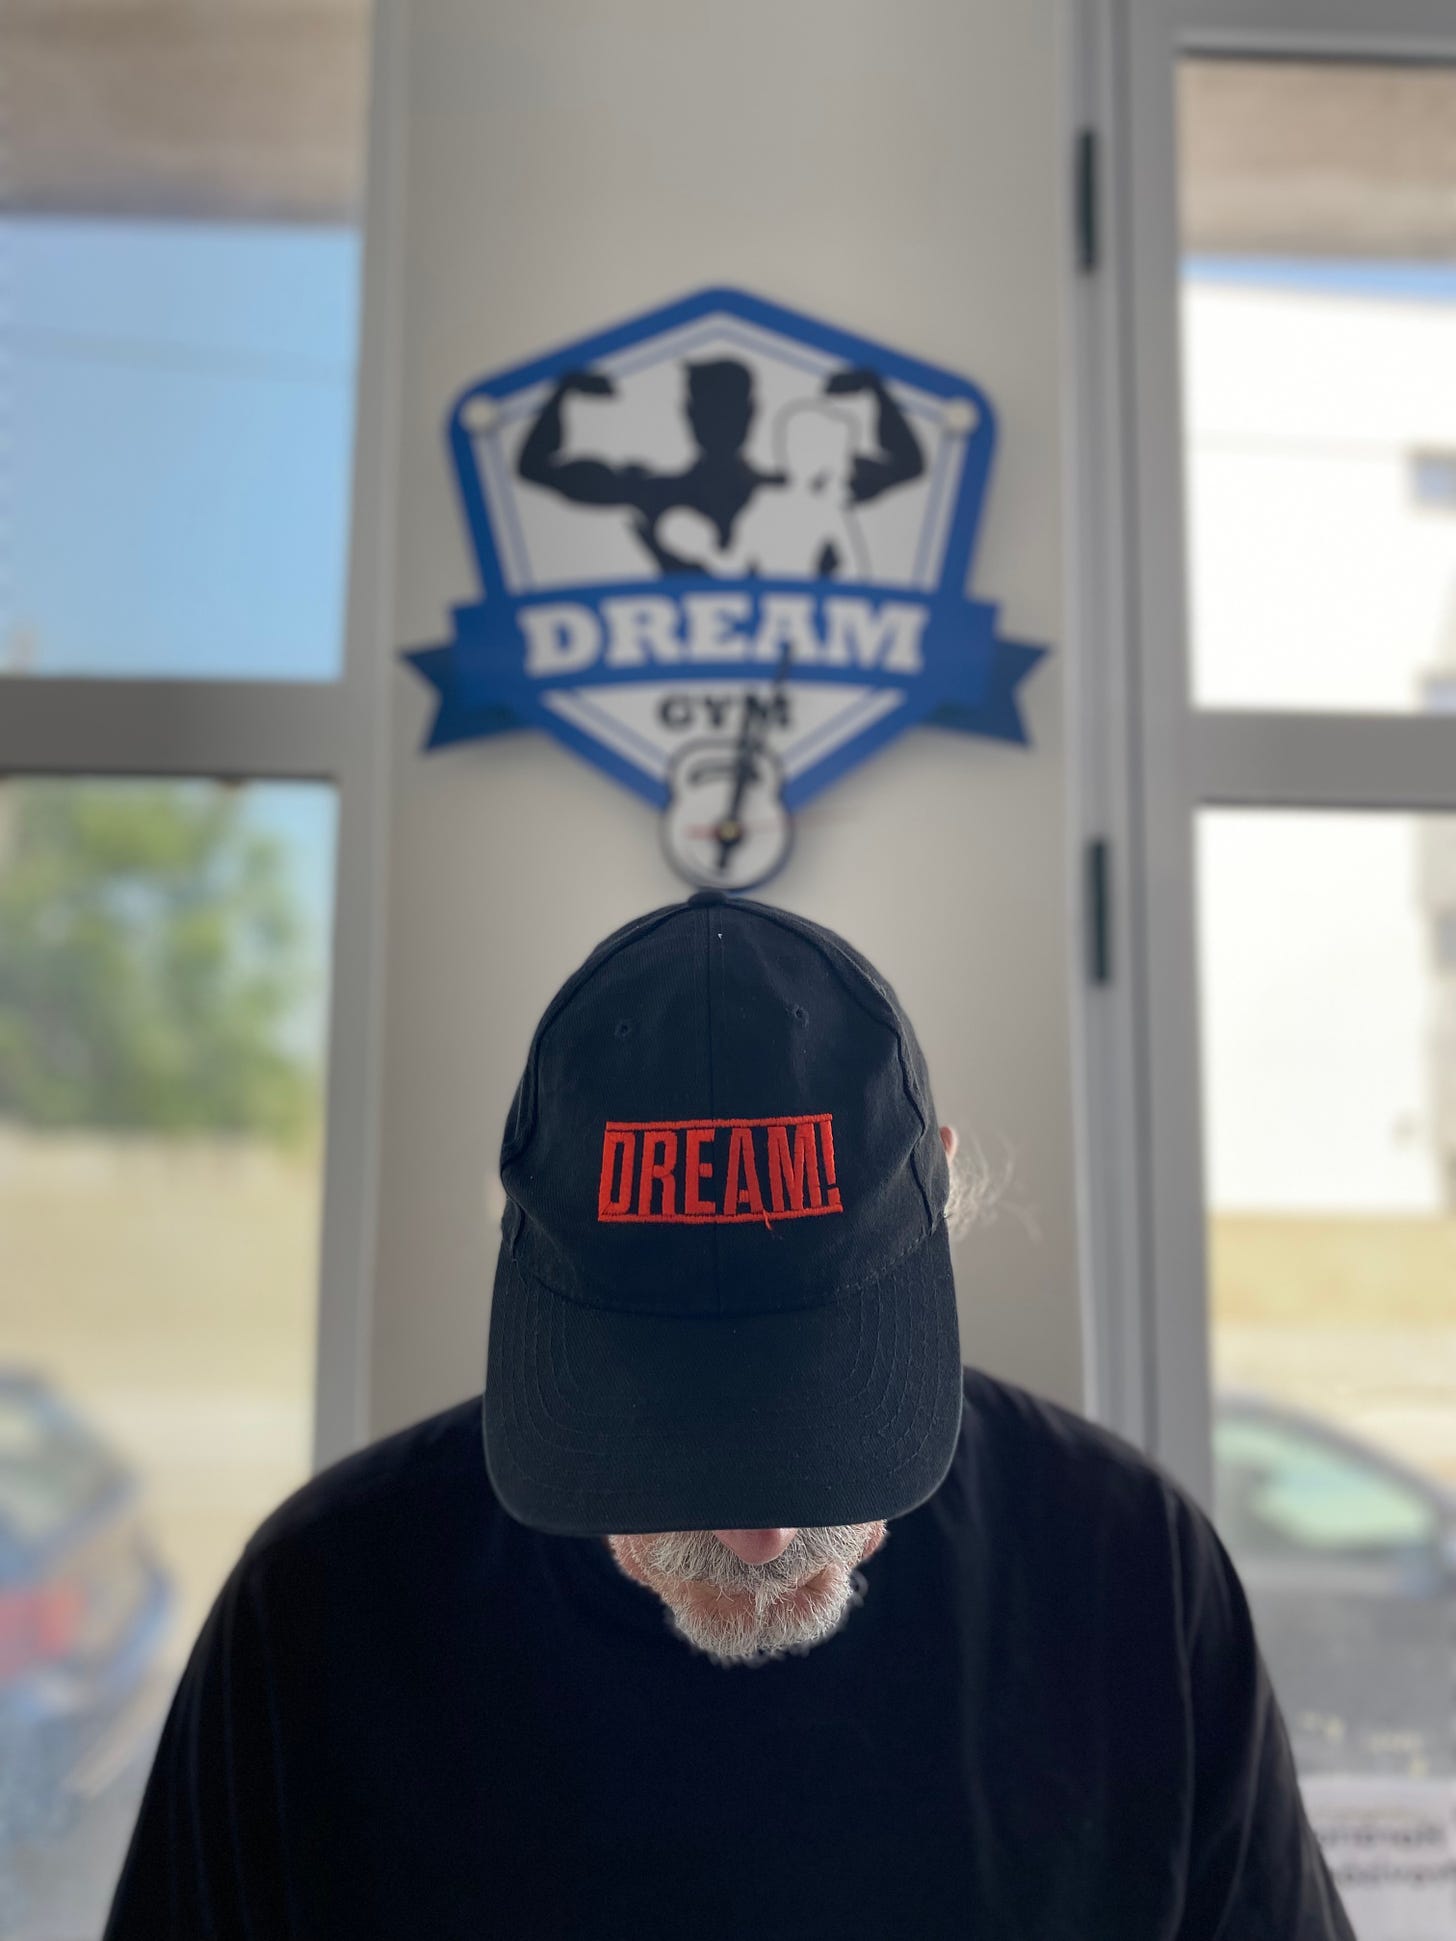 Simon Campbell wearing a DREAM cap in the Dream gym